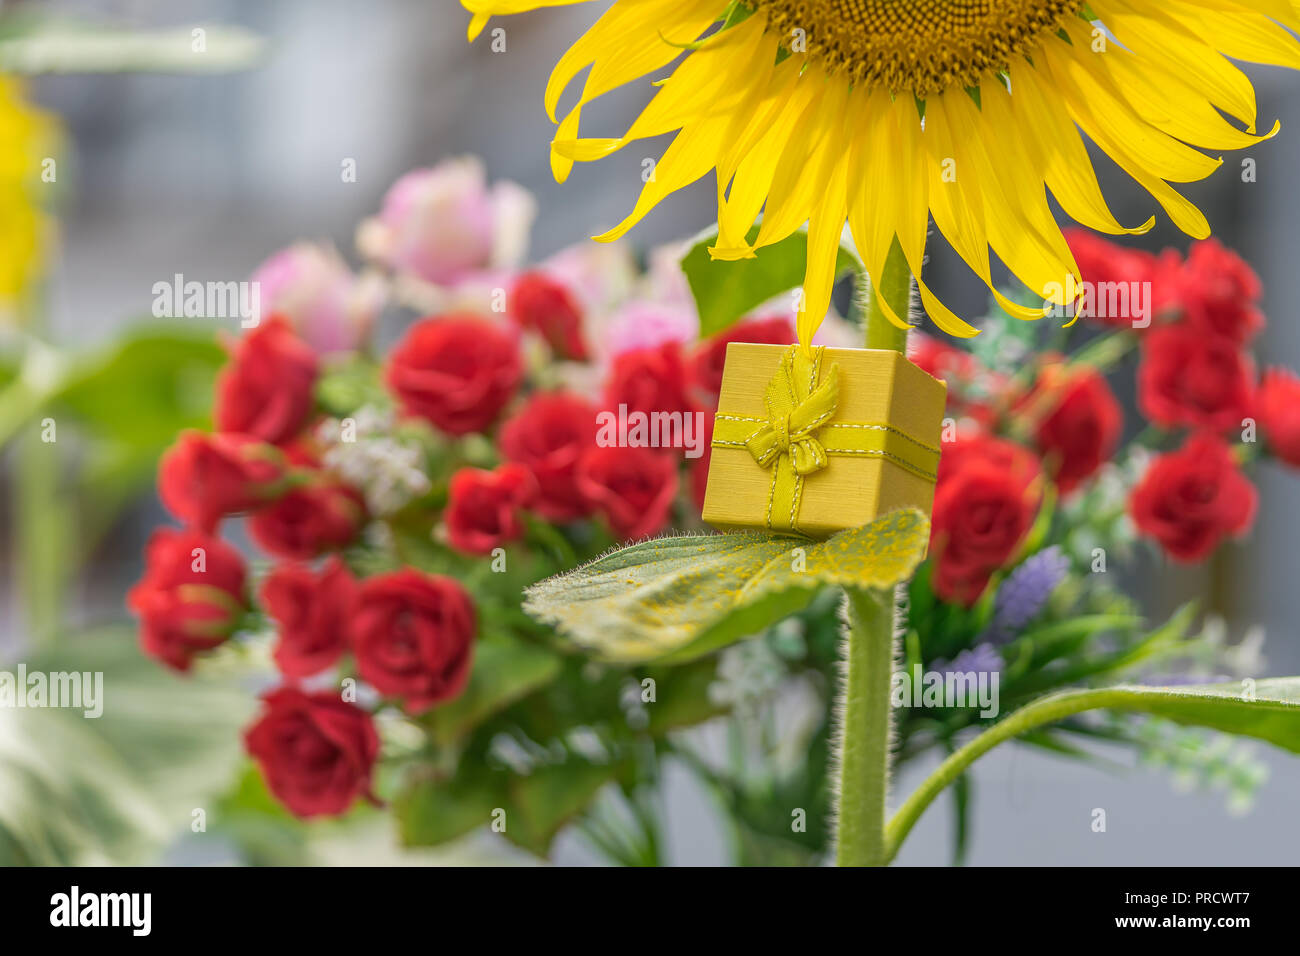 A sunflower with a golden gift, conceptual image. Stock Photo